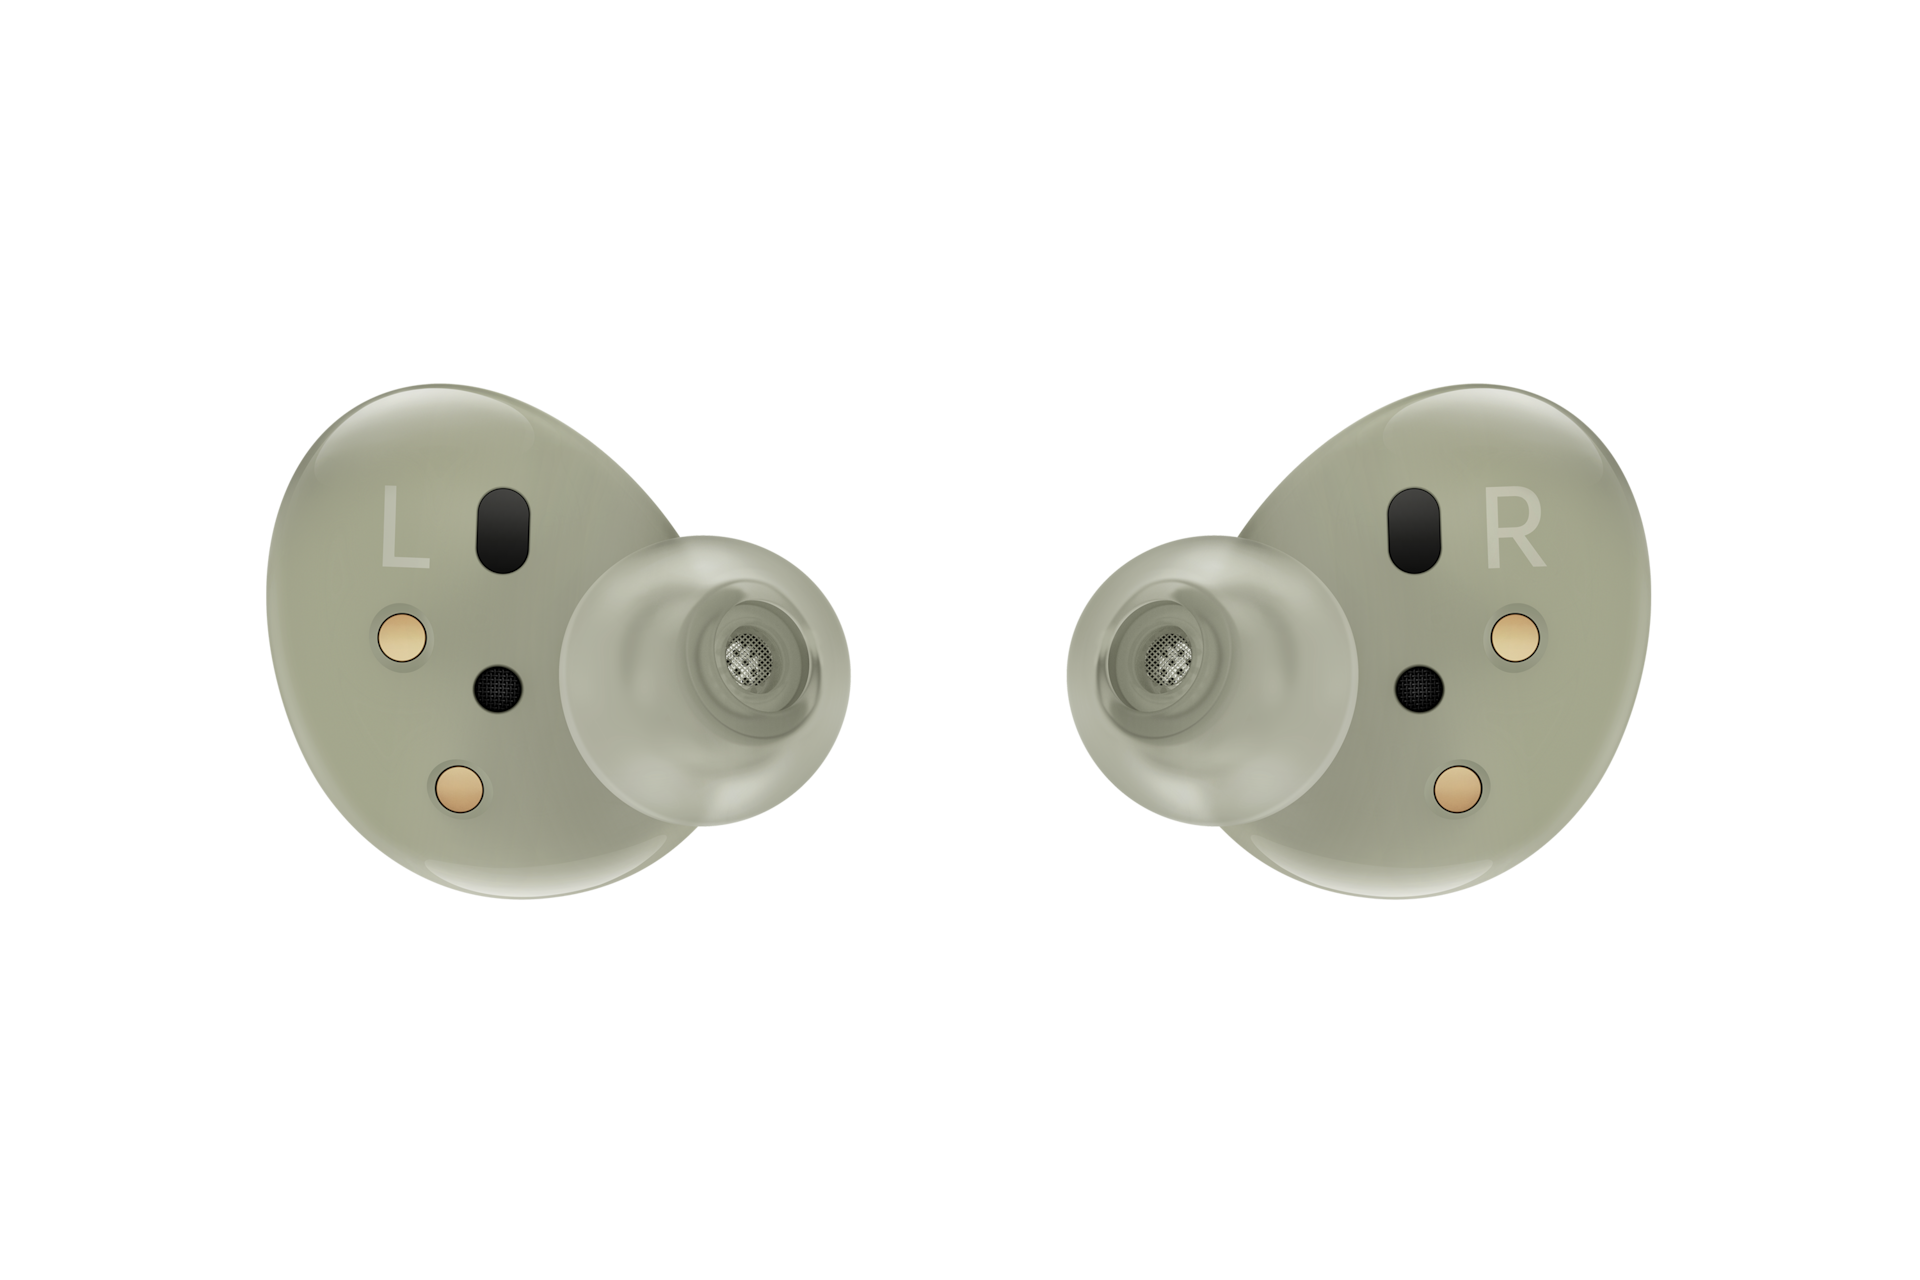 Galaxy Buds2 Olive, Caractéristiques